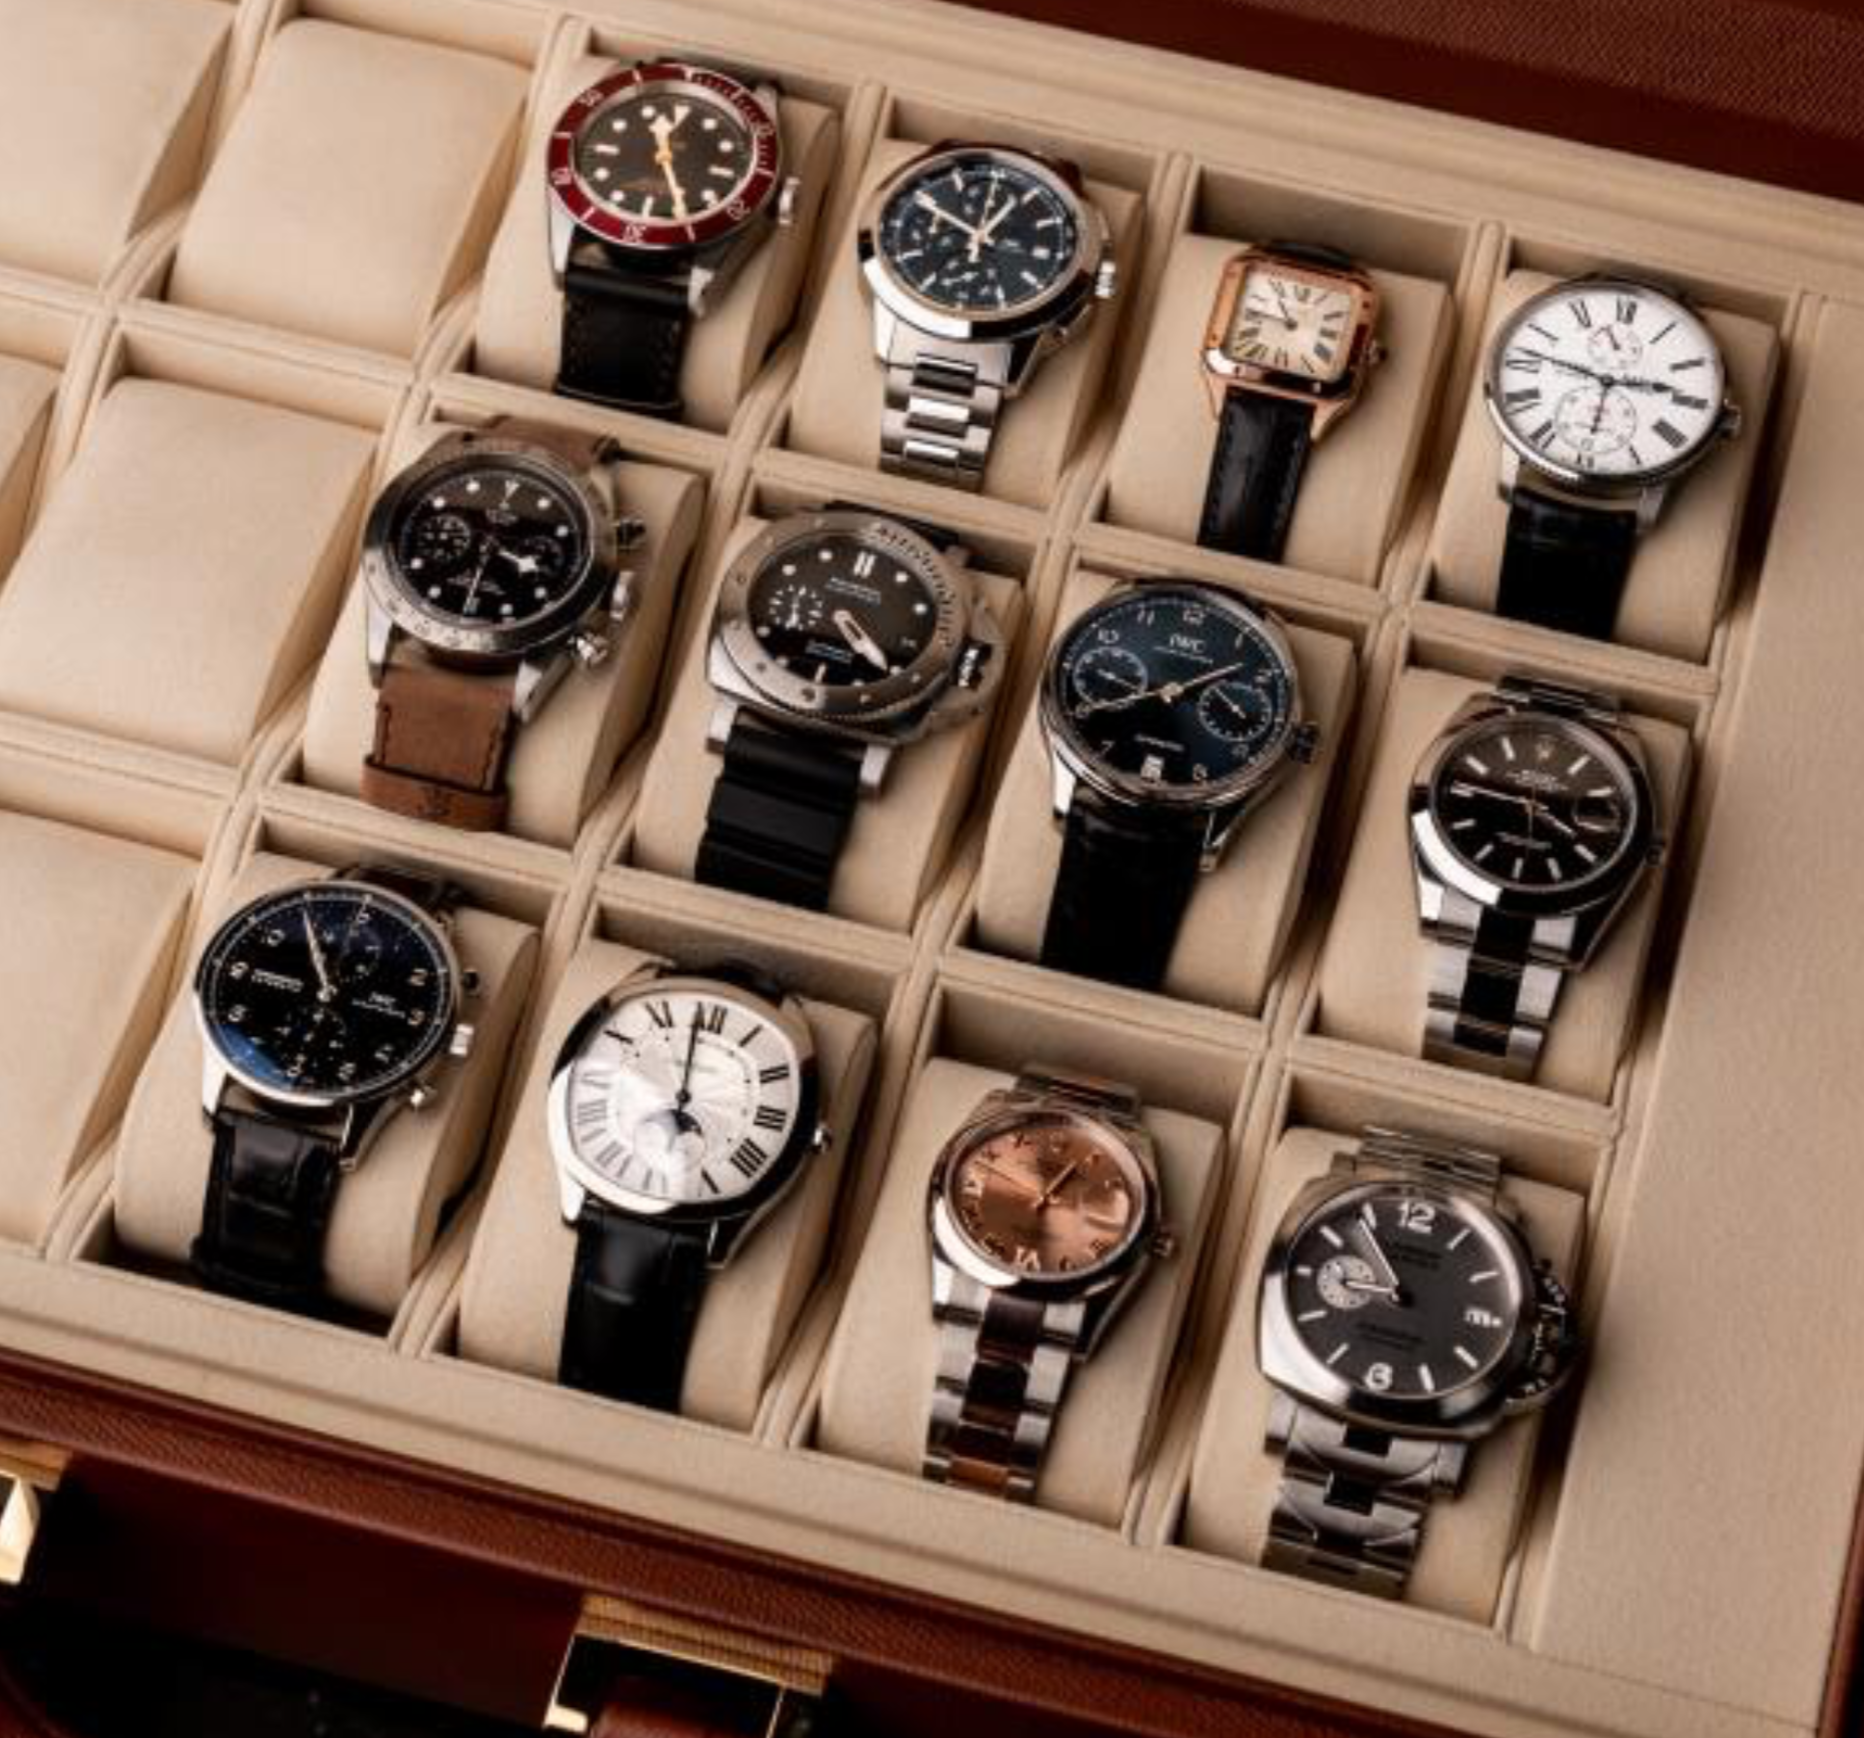 Would you pay a retailer 100K per year to choose 12 watches for you?